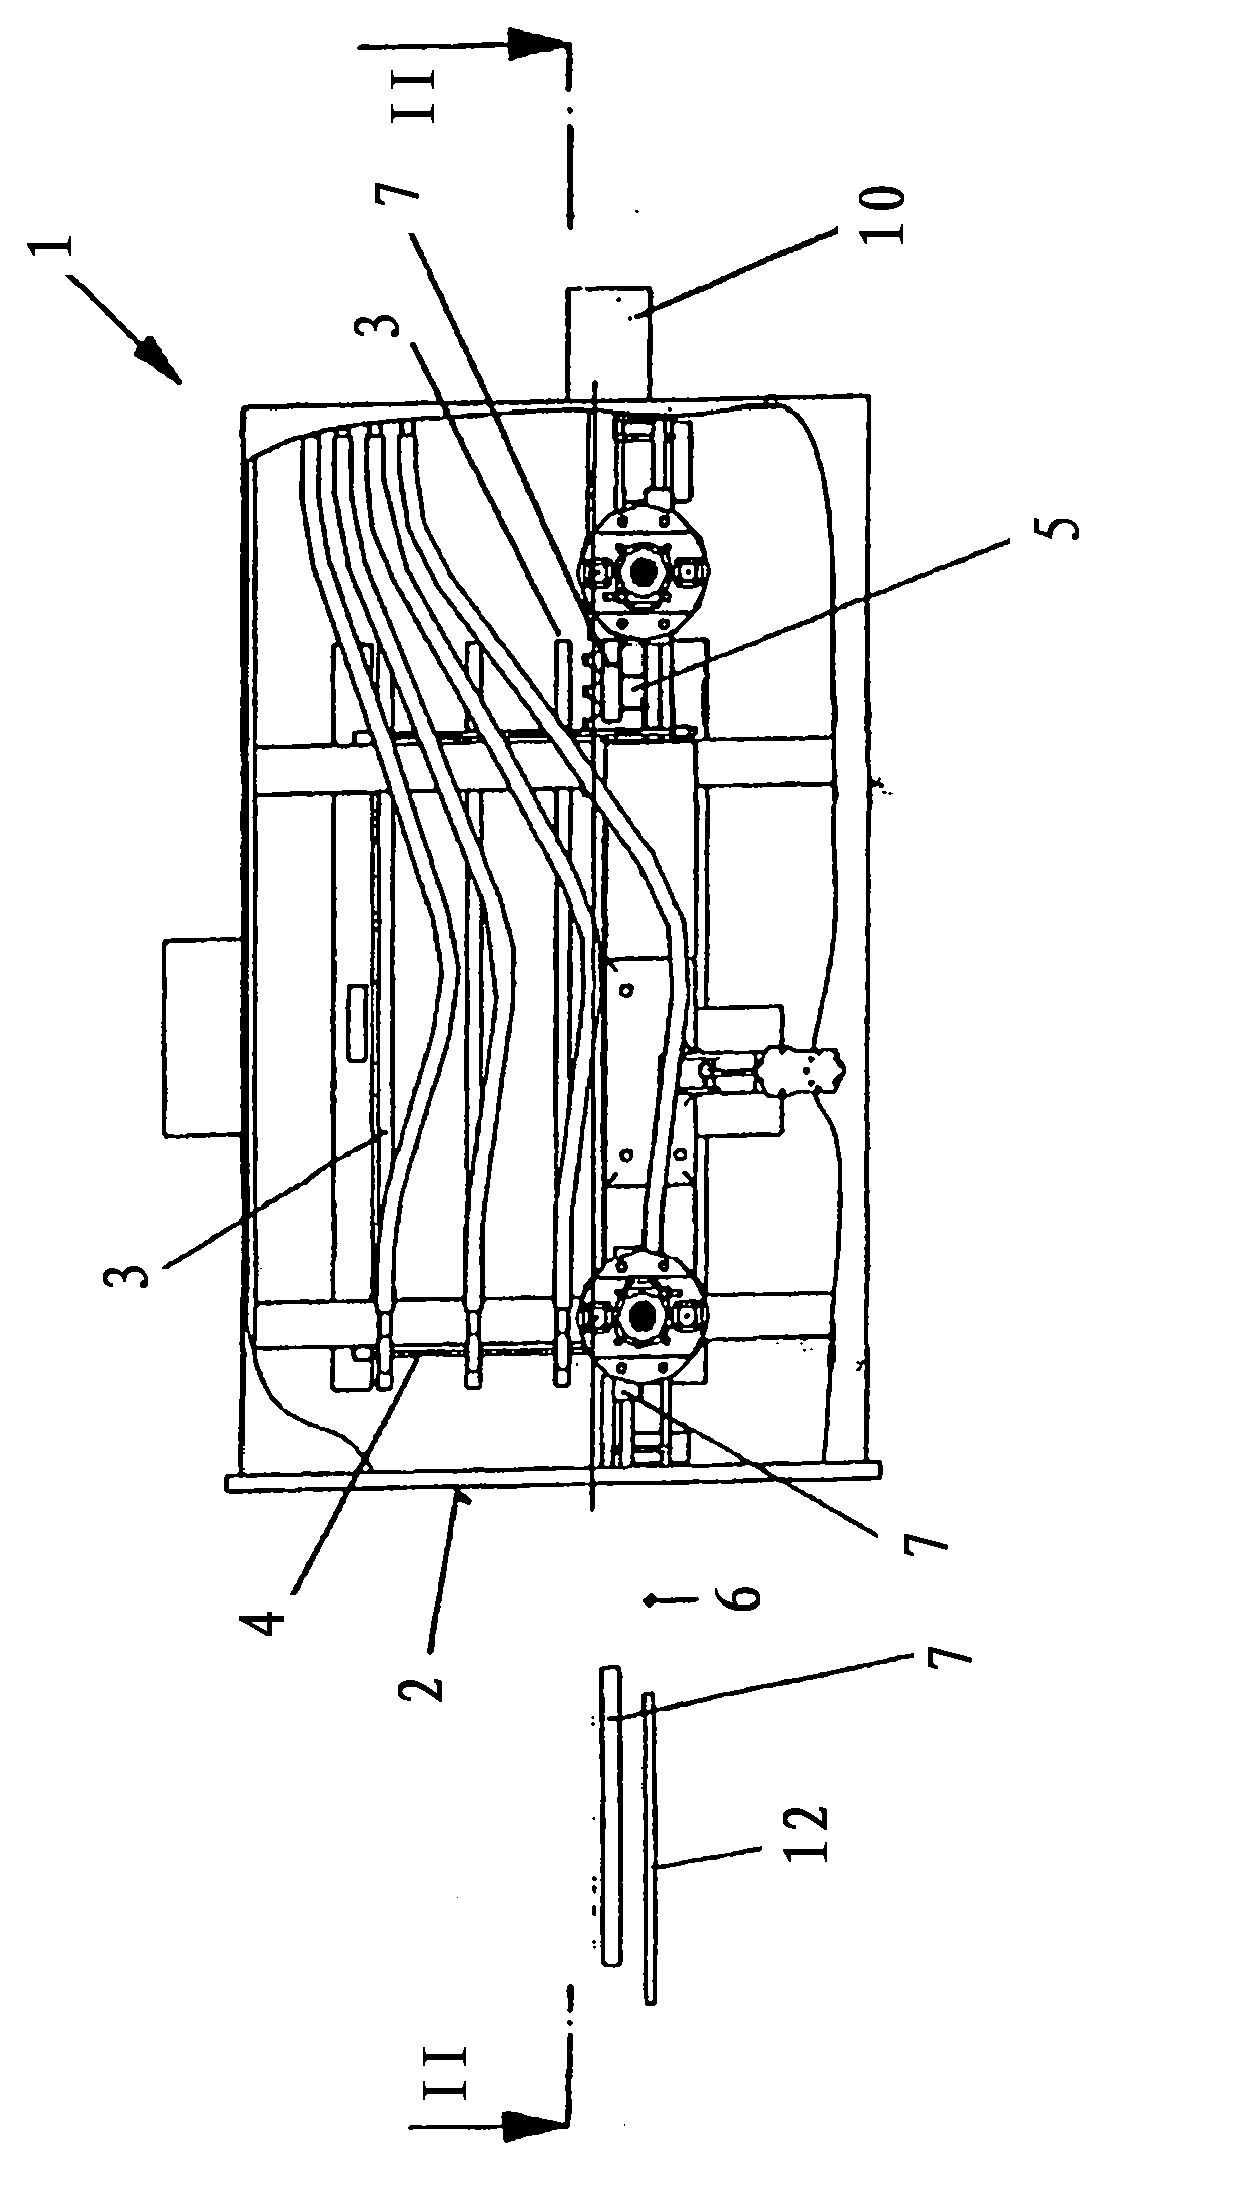 Loading and unloading device for a freeze-drying installation